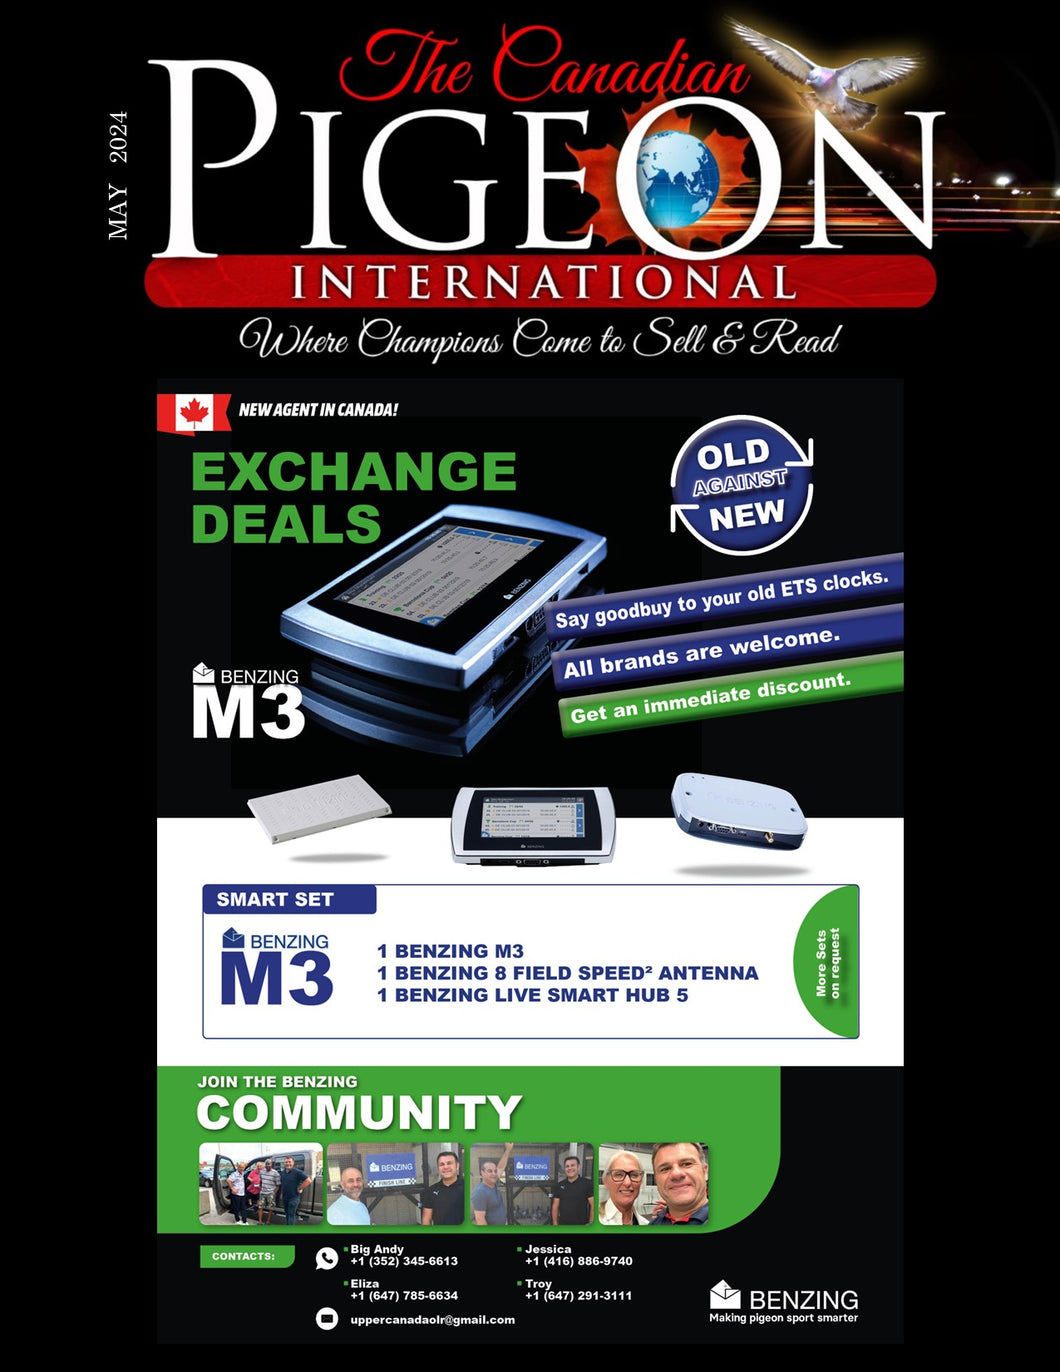 12 Month Subscription - the Canadian Pigeon International magazine